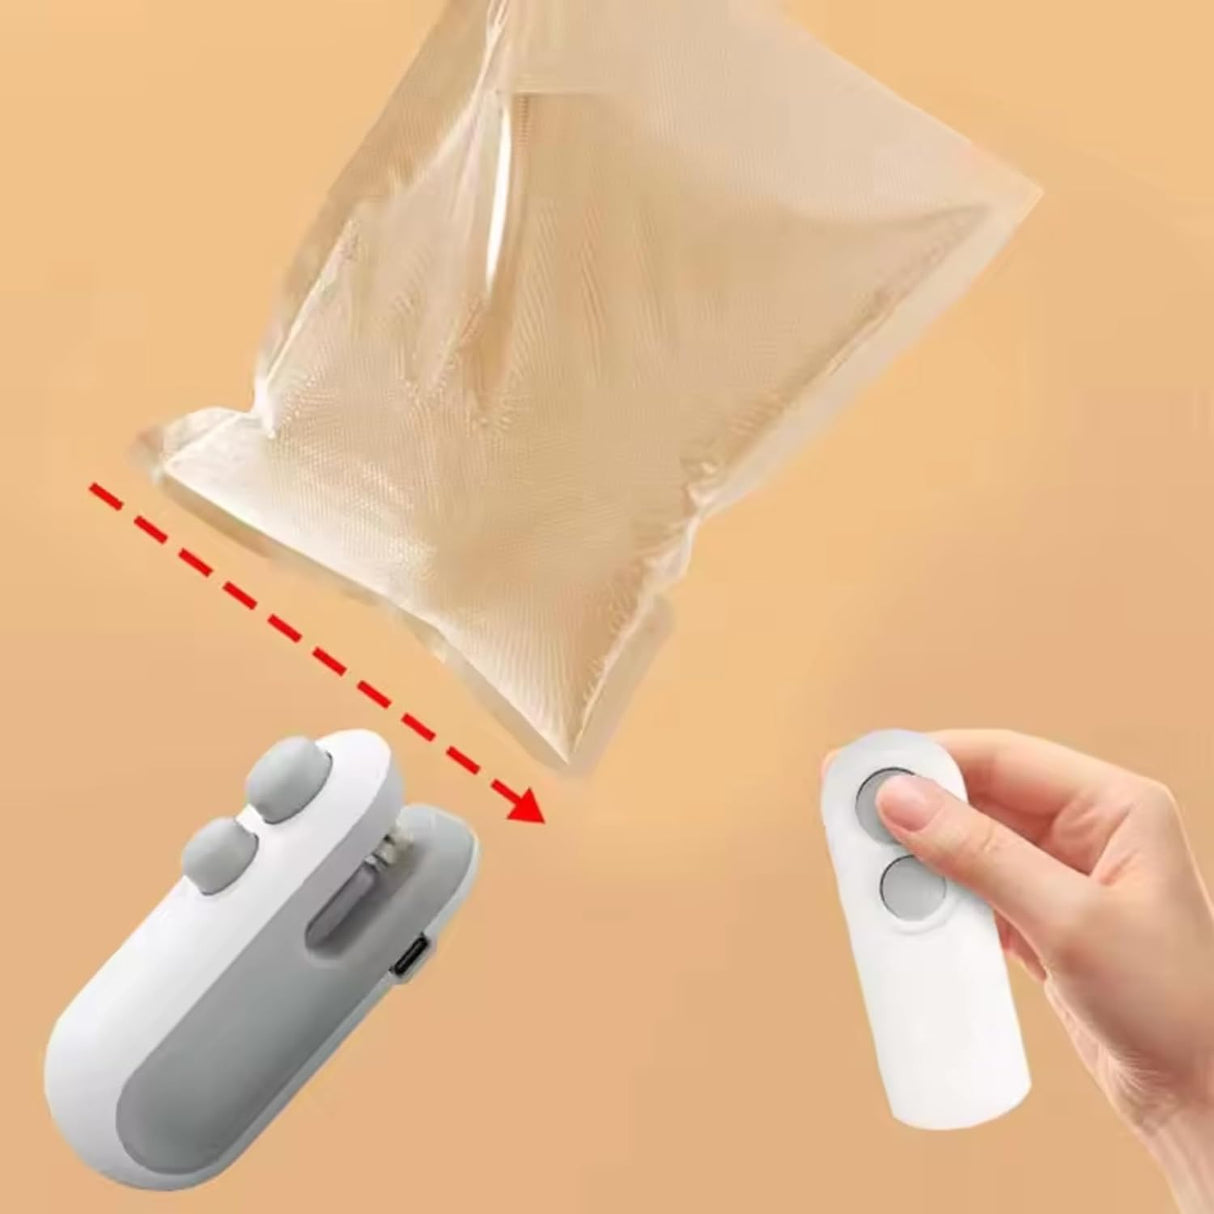 Portable Mini Sealing Machine, Handheld Packet, Food, Snacks, Chips Sealer with rechargeable Type c